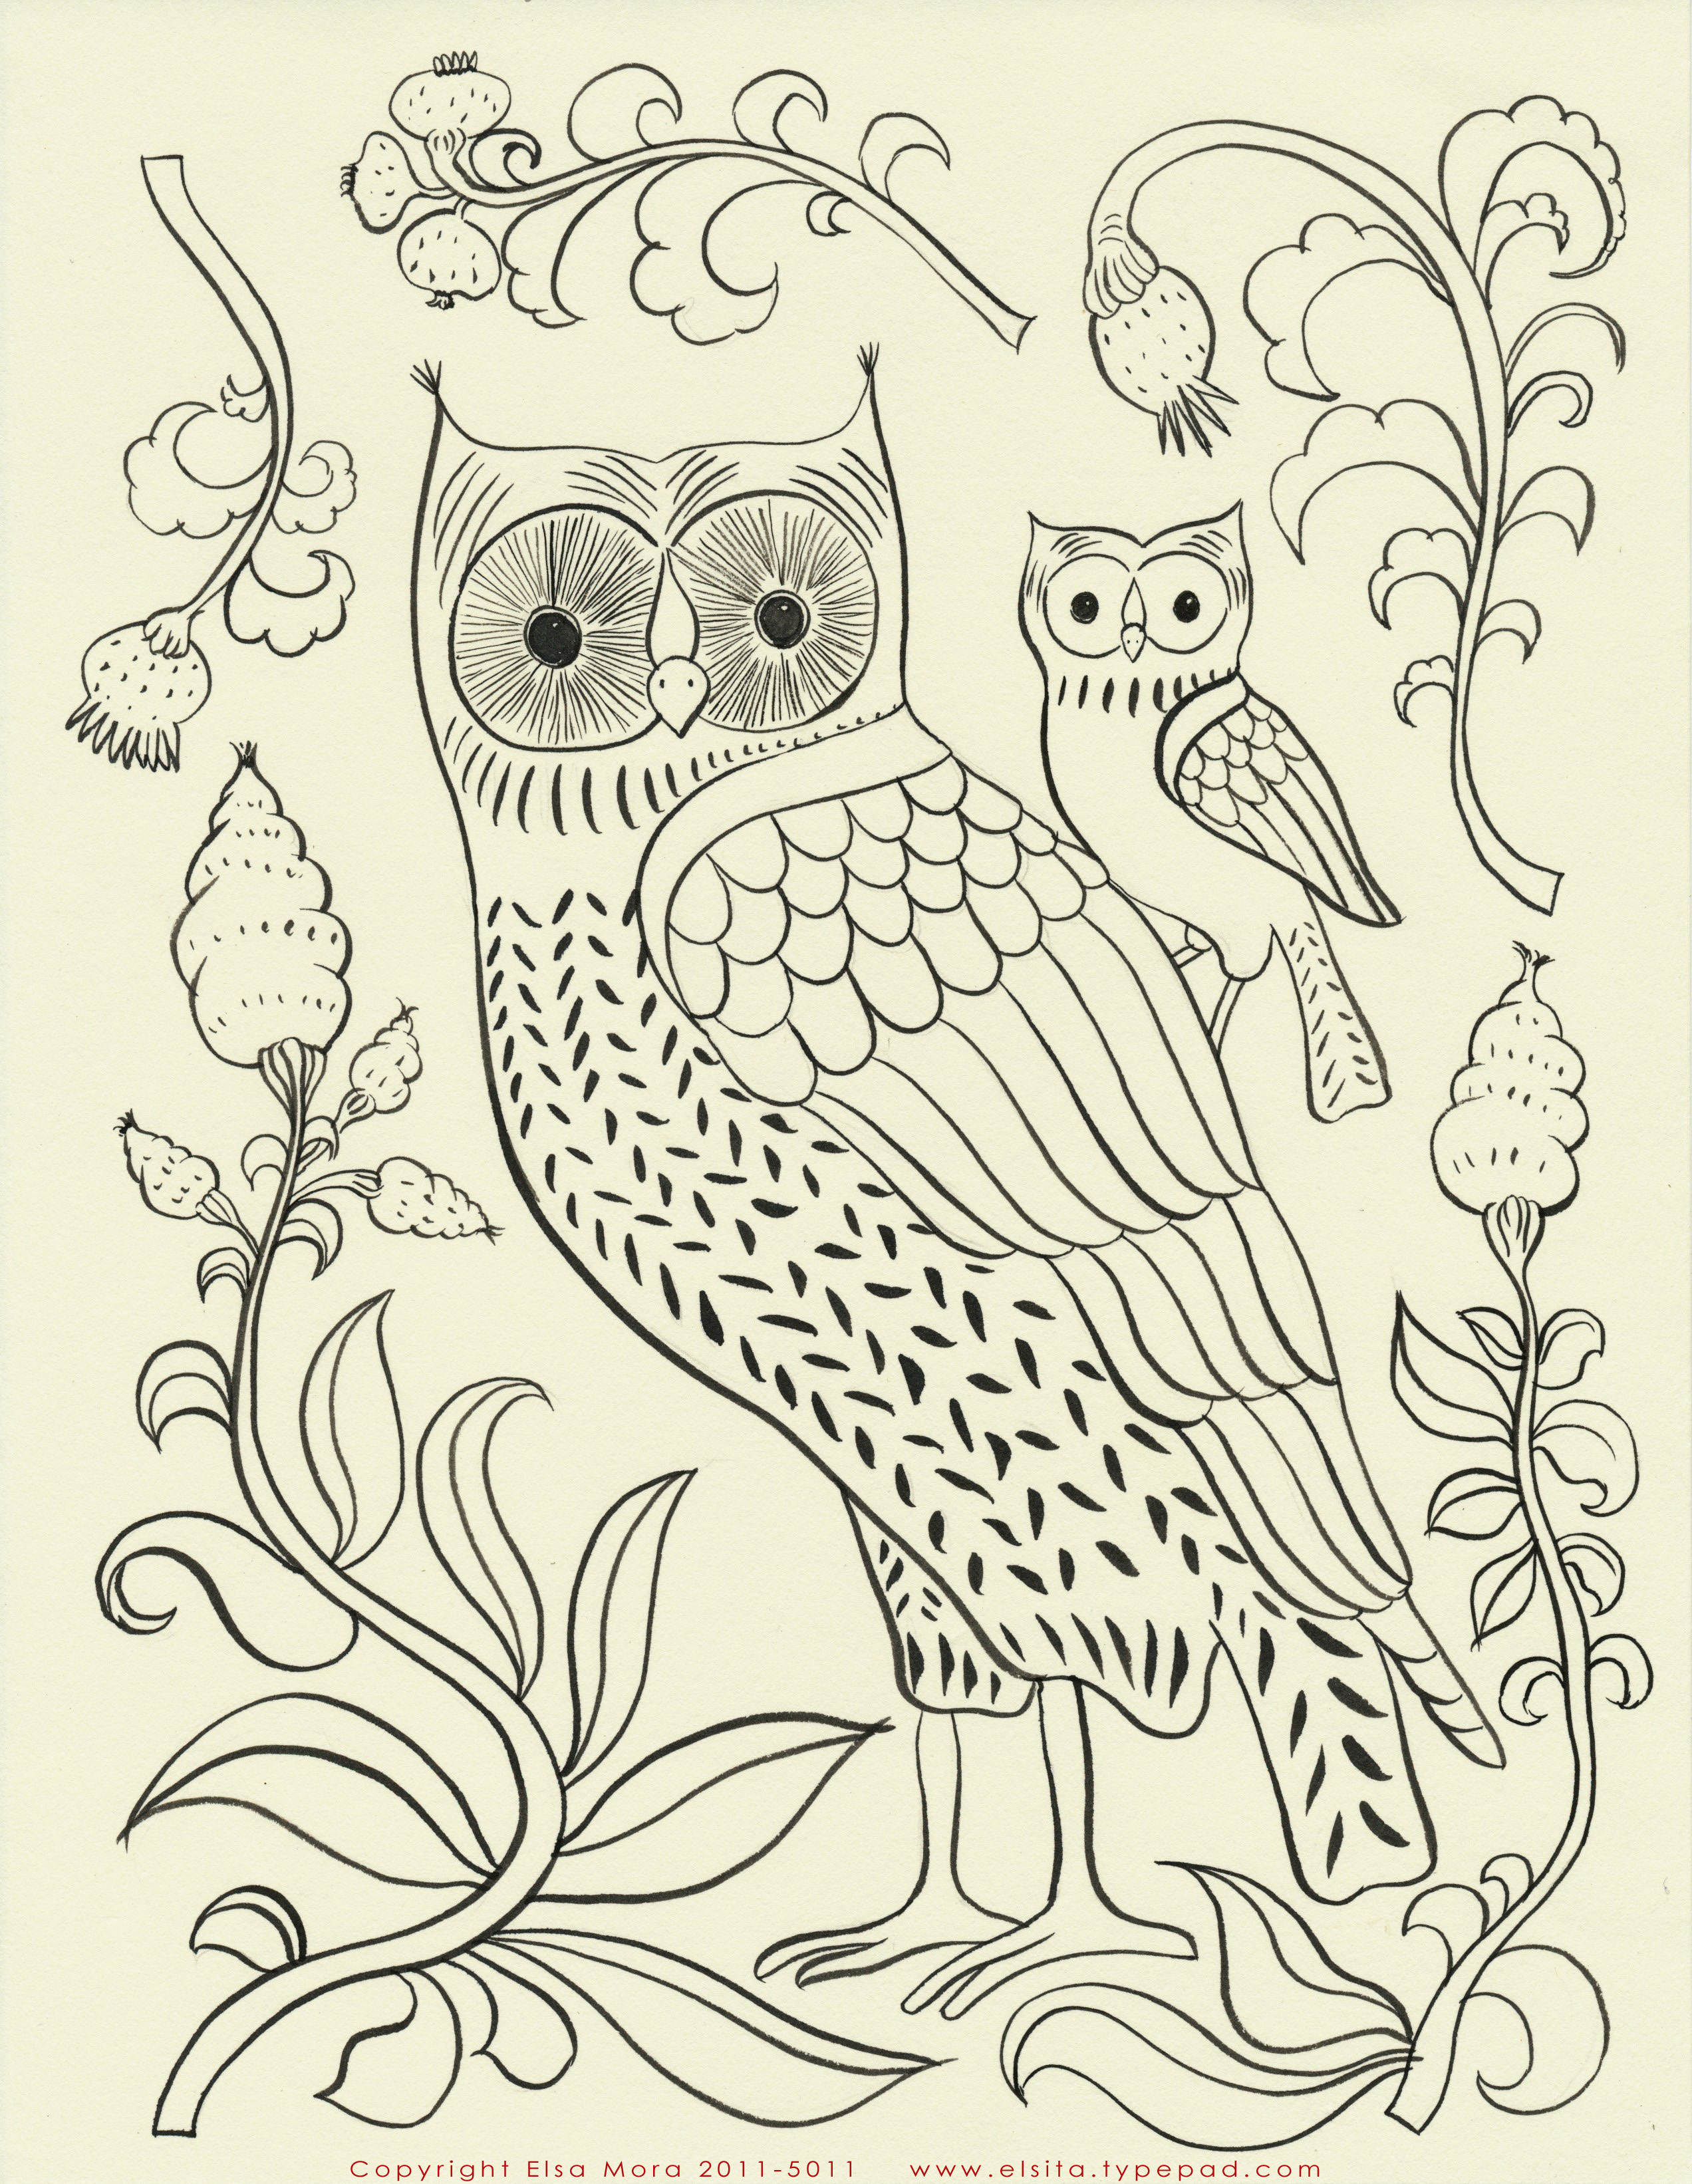 Bird Embroidery Patterns Elsa Mora Two Free Embroidery Patterns For You